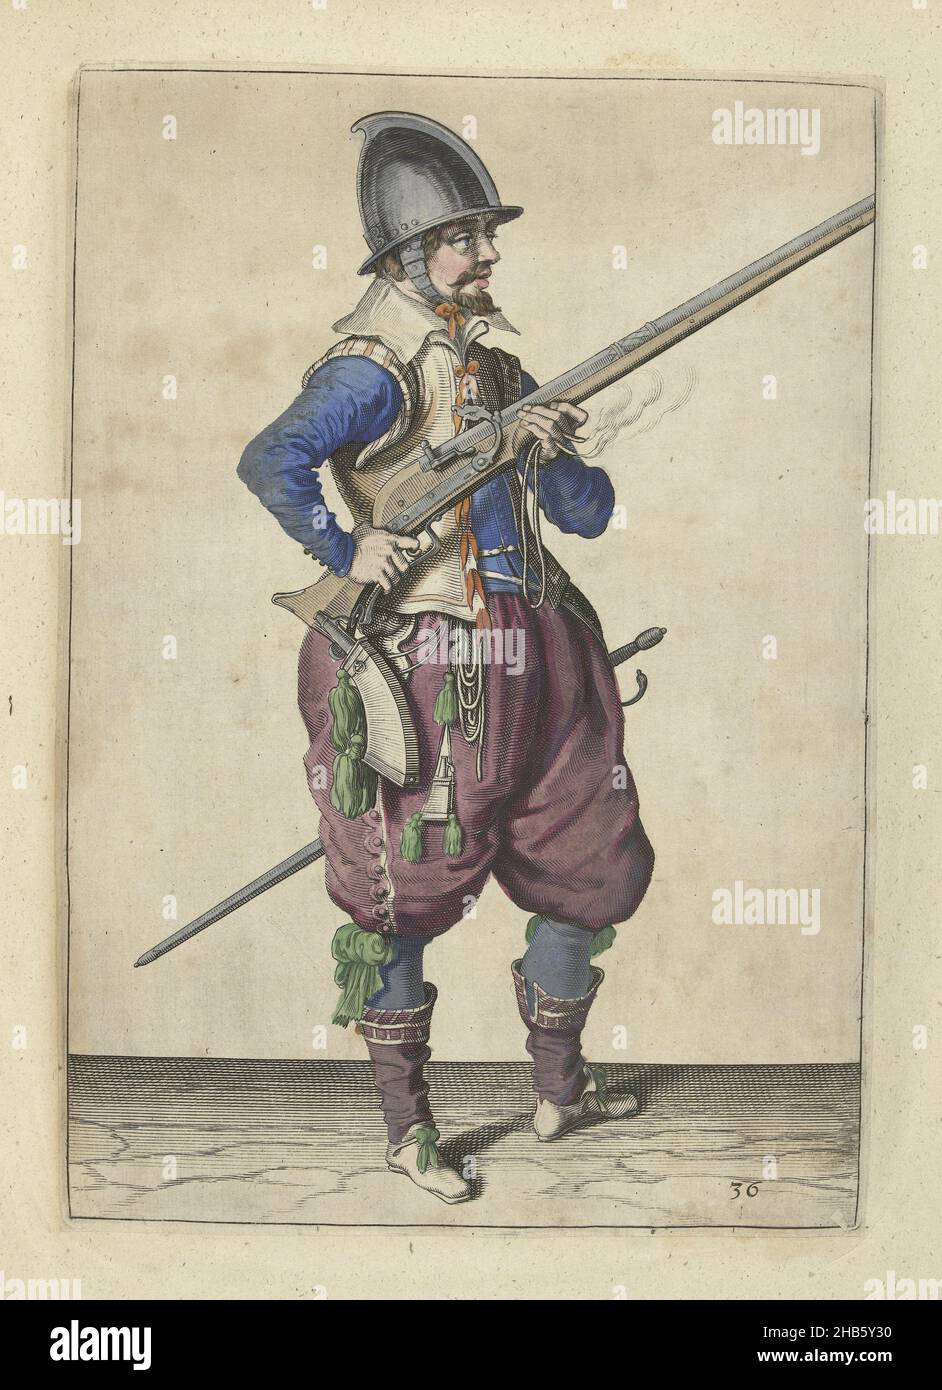 Soldier on guard holding his rudder by his right side angled upward, his finger on the trigger (no. 36), c. 1600, A soldier on guard, full-length, to the right, holding a rudder (a certain type of firearm) with both hands by his right side, his right index finger on the trigger, the barrel angled upward (no. 36), c. 1600. In his left hand, in addition to the barrel of the rudder, a burning fuse. Plate 36 in the instructions for handling the rudder: Shortest instruction upon the contrefaictinges, touching the right use of calivers. Part of the illustrations in an English edition of J. de Gheyn' Stock Photo